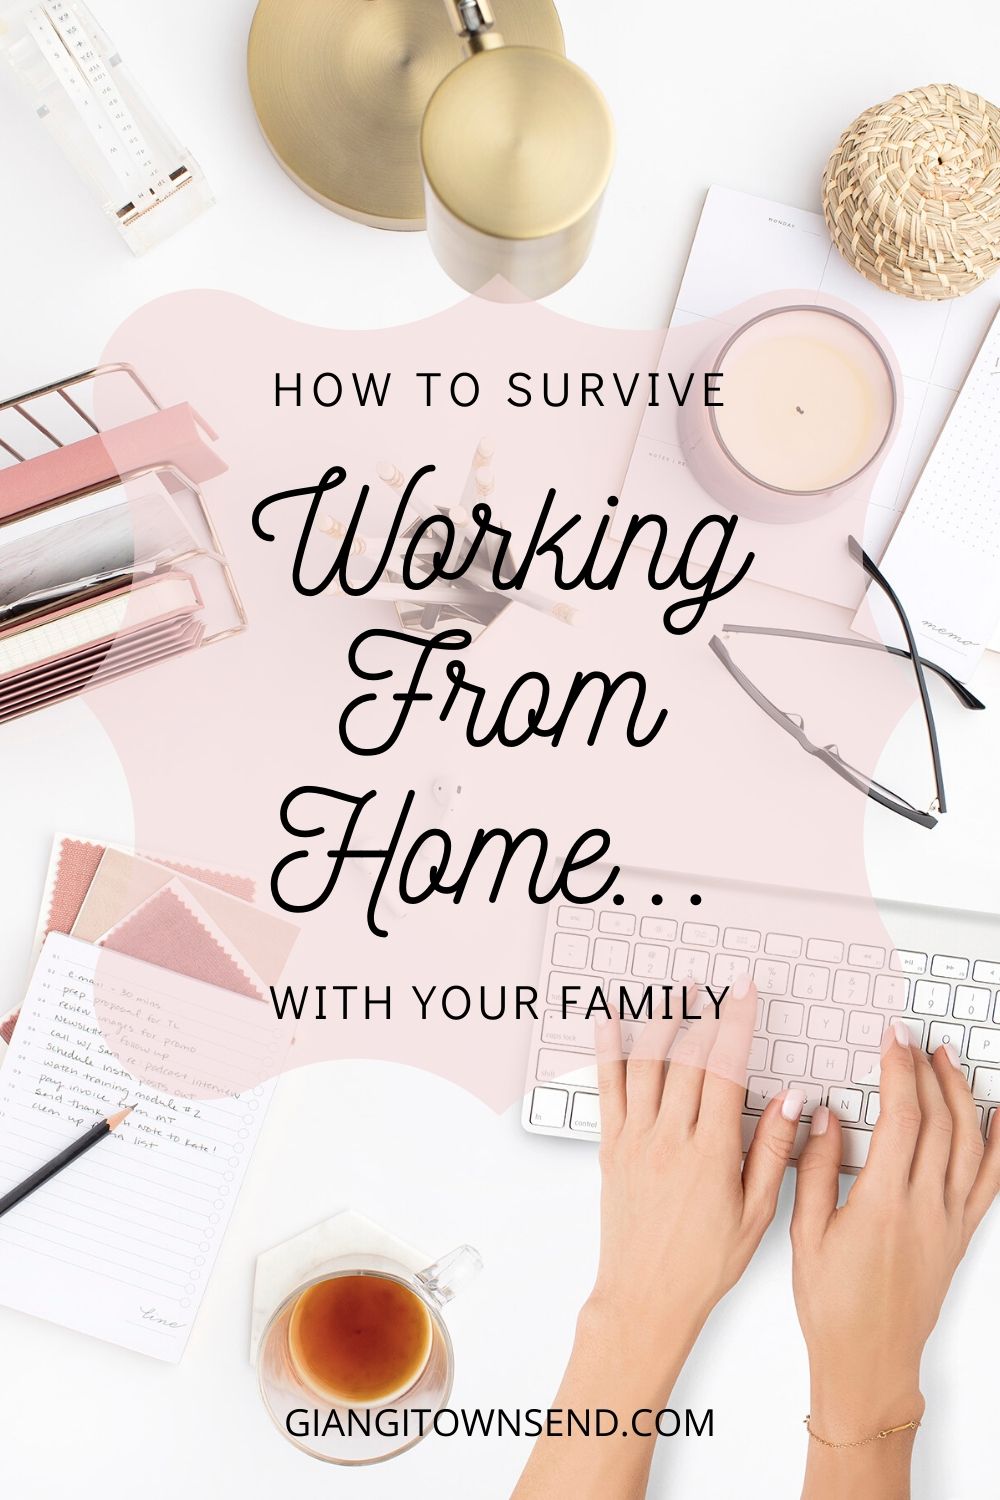 How To Survive Working From Home ... With Your Family